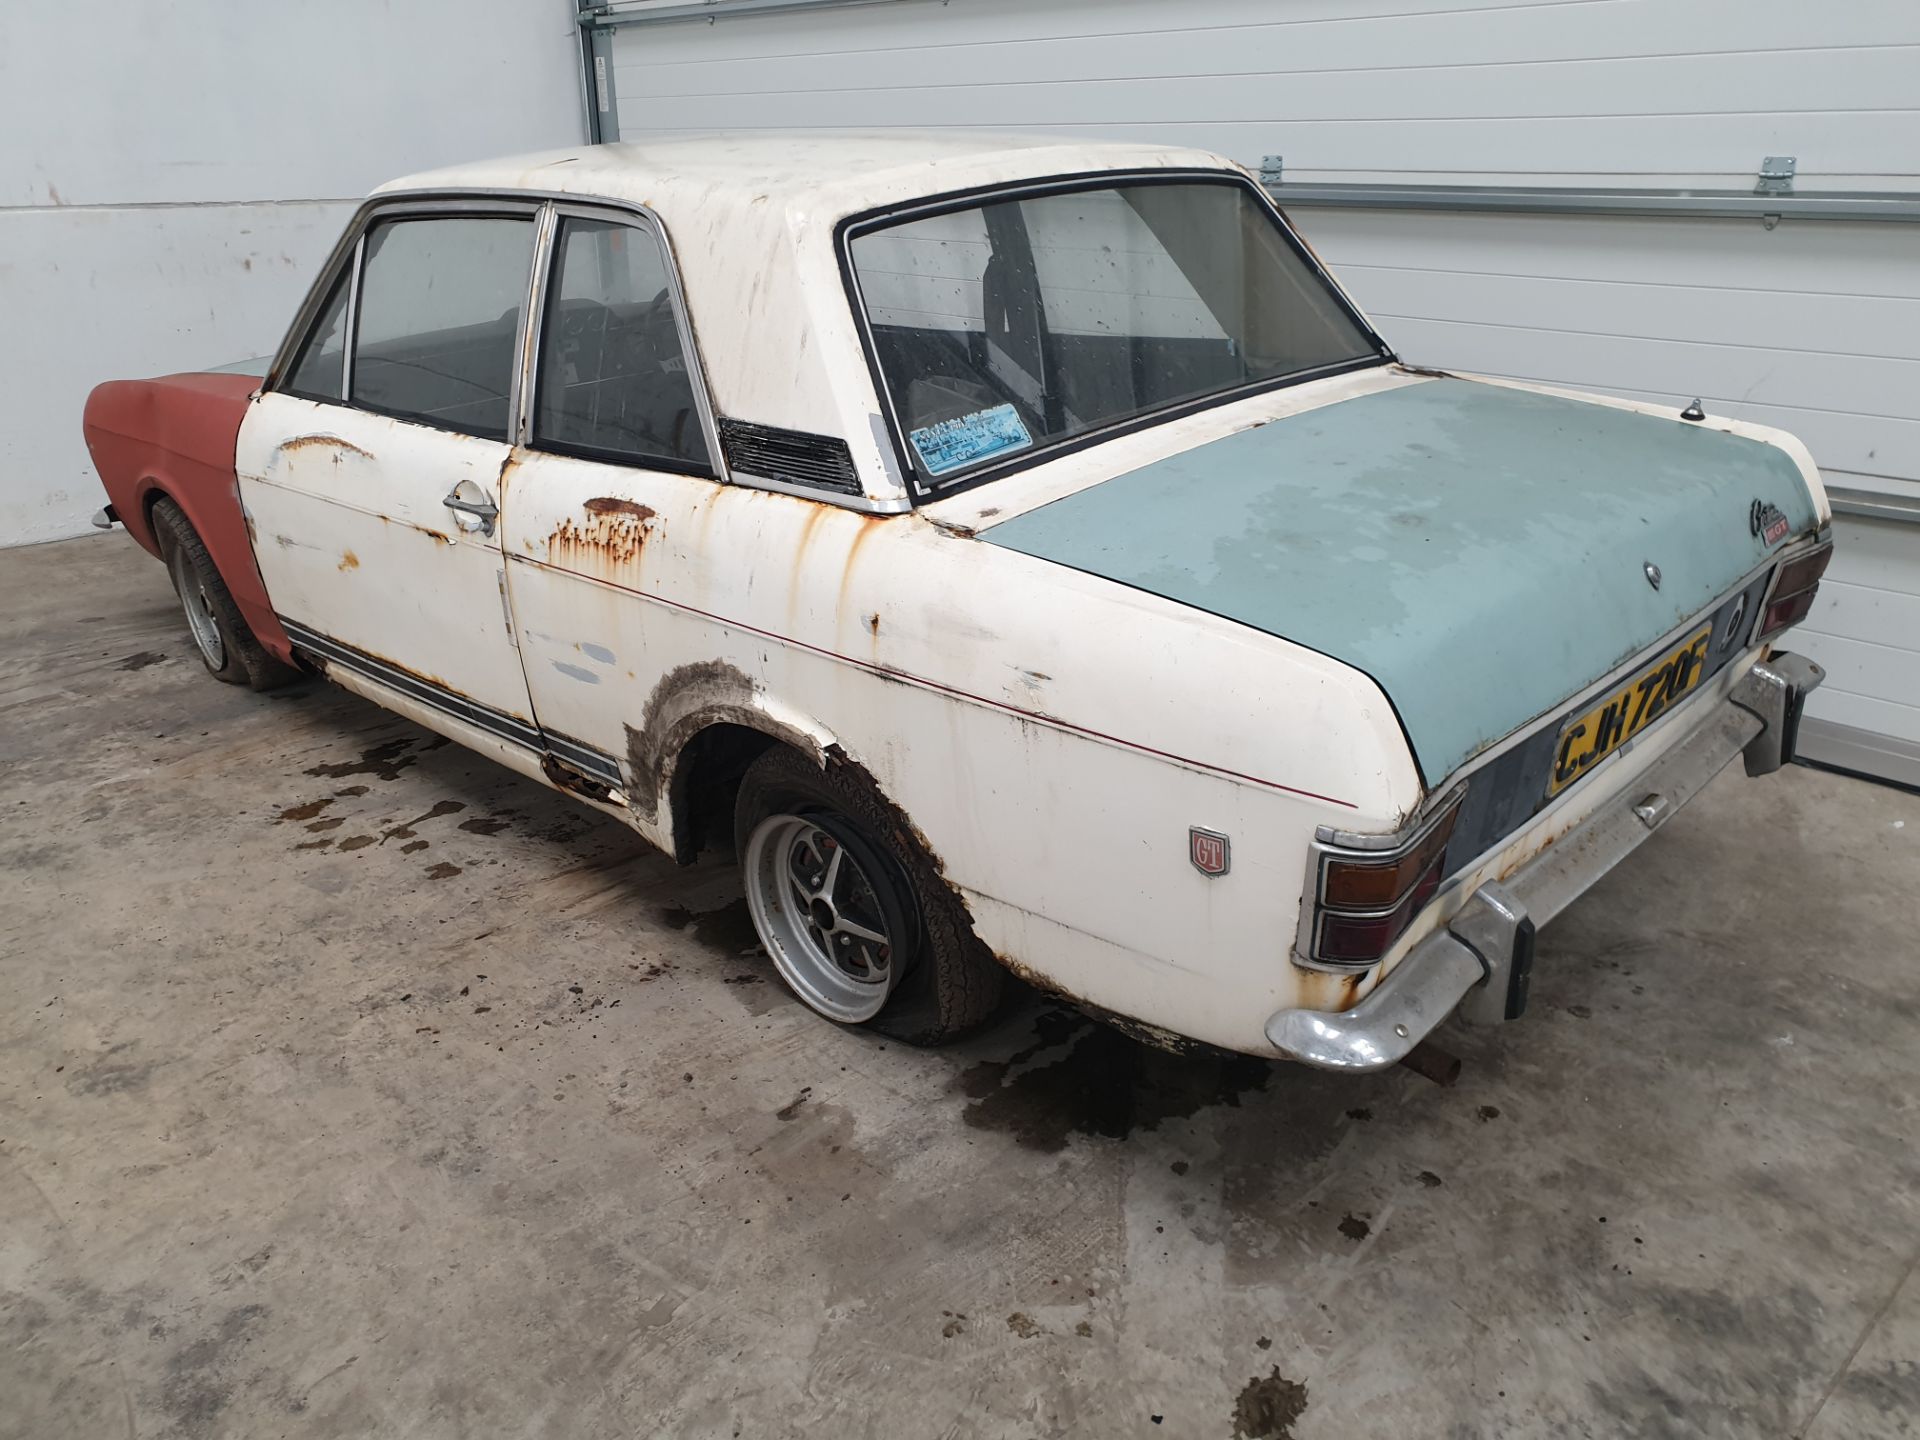 Ford Cortina 1600 GT 2 dr - Image 5 of 11